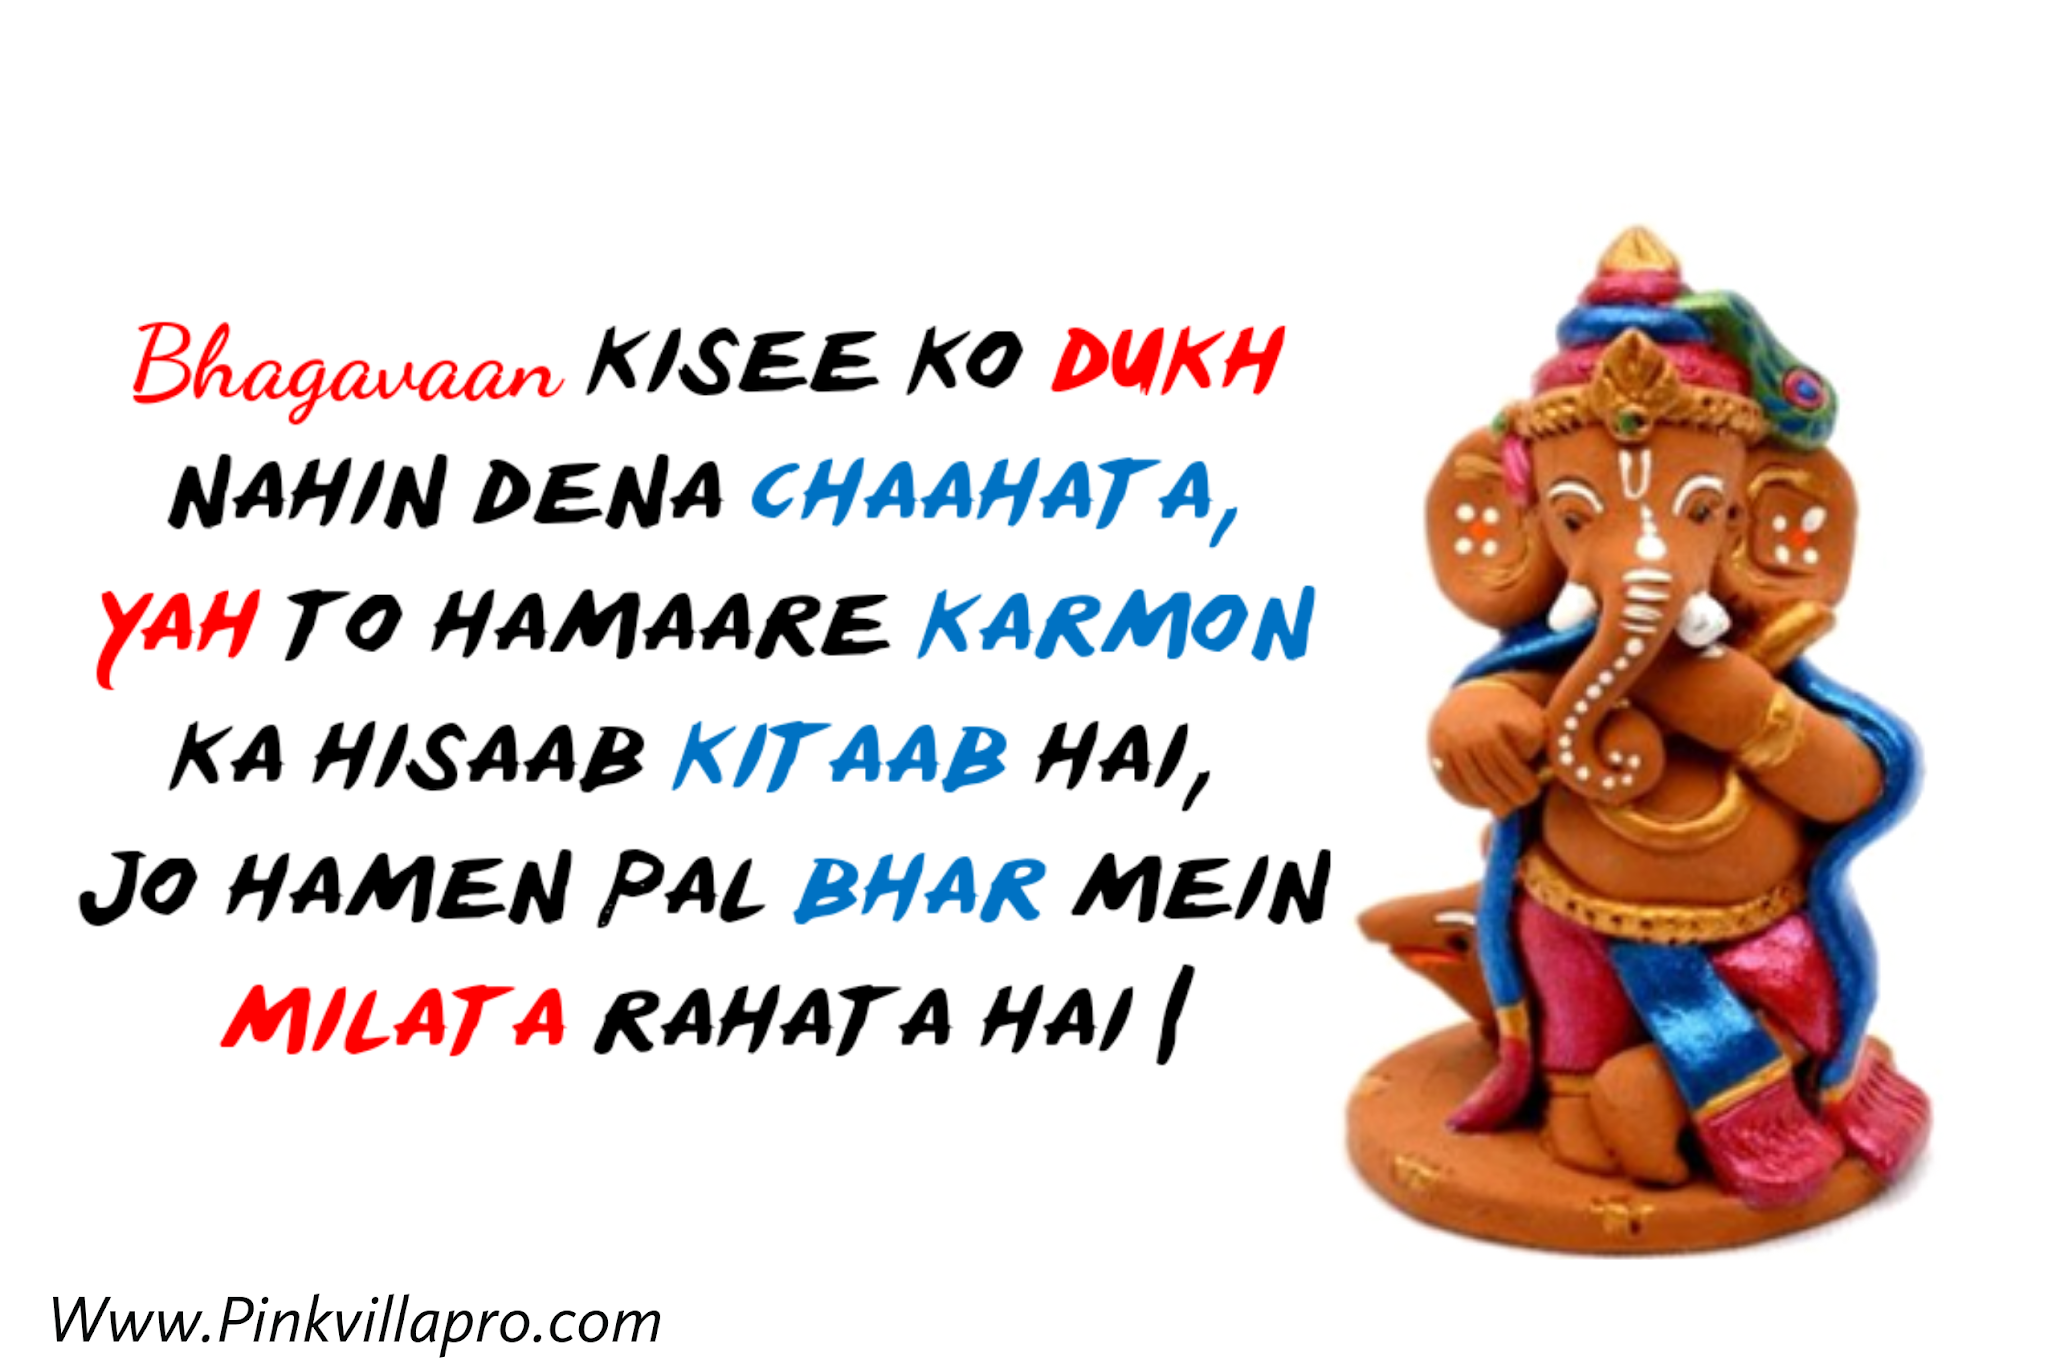 Happy Ganesh Chaturthi Wishes Quotes, Images